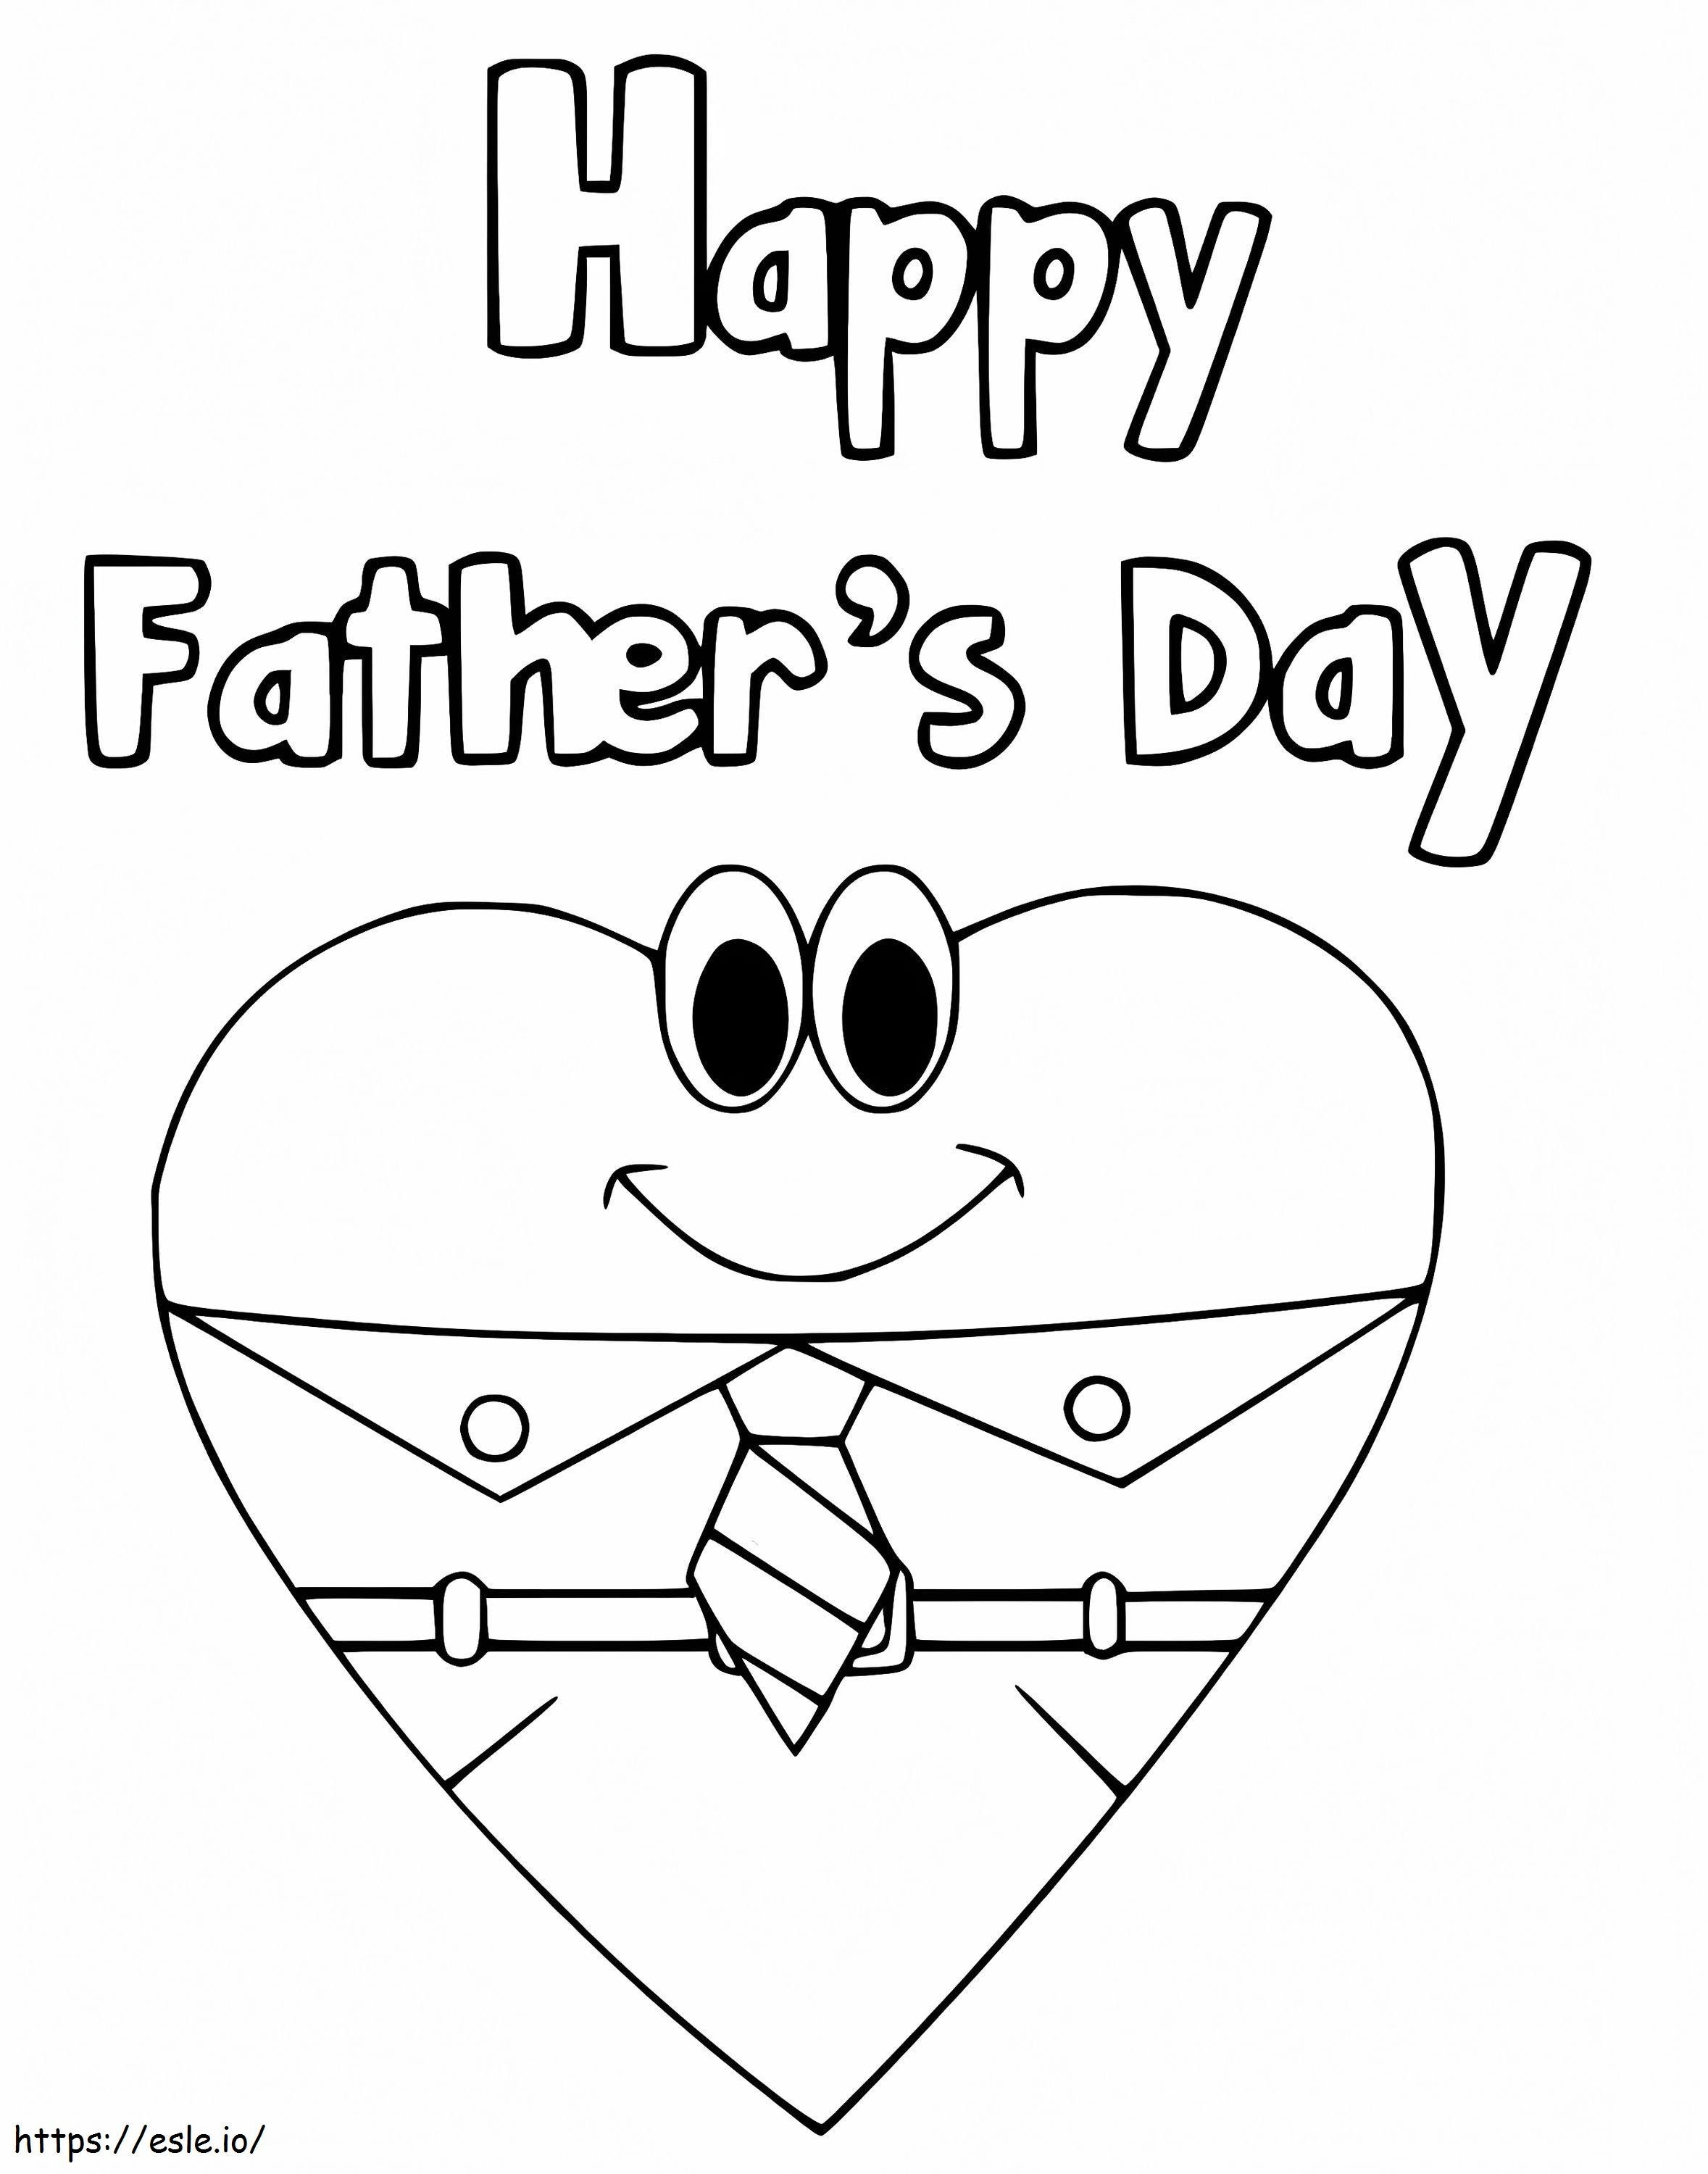 Happy Fathers Day 7 coloring page